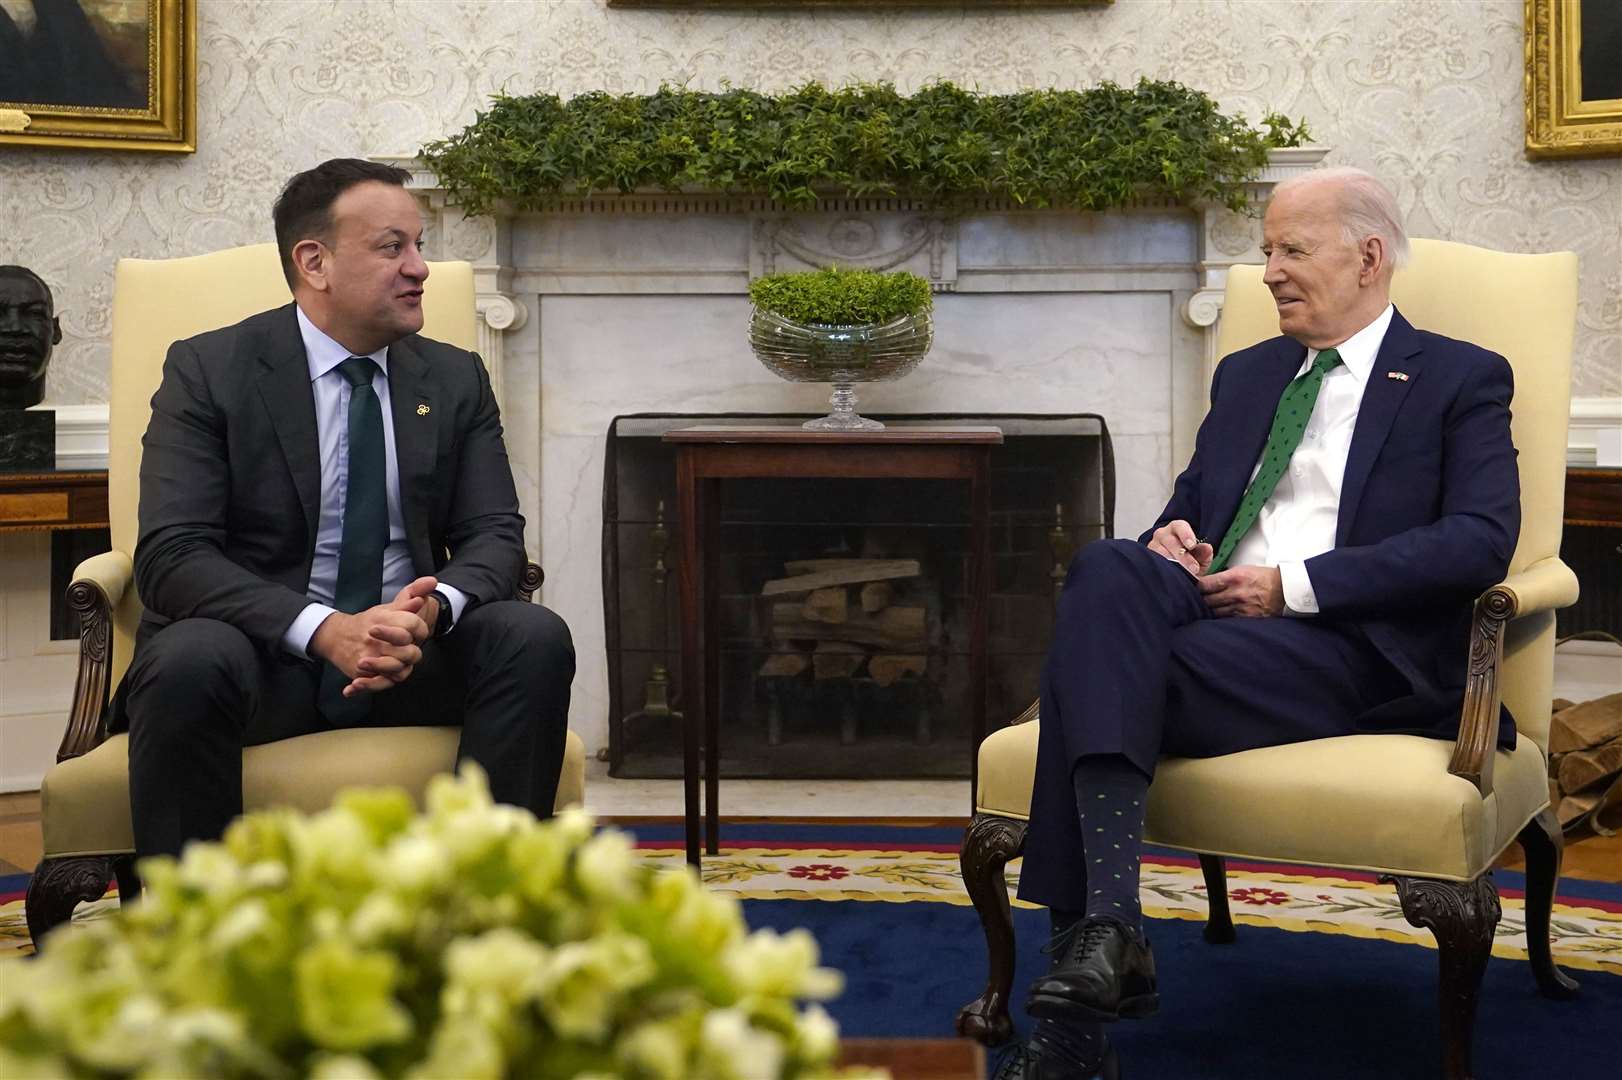 Taoiseach Leo Varadkar (left) at a bilateral meeting with President Joe Biden in the Oval Office at the White House in Washington, DC. (Niall Carson/PA)